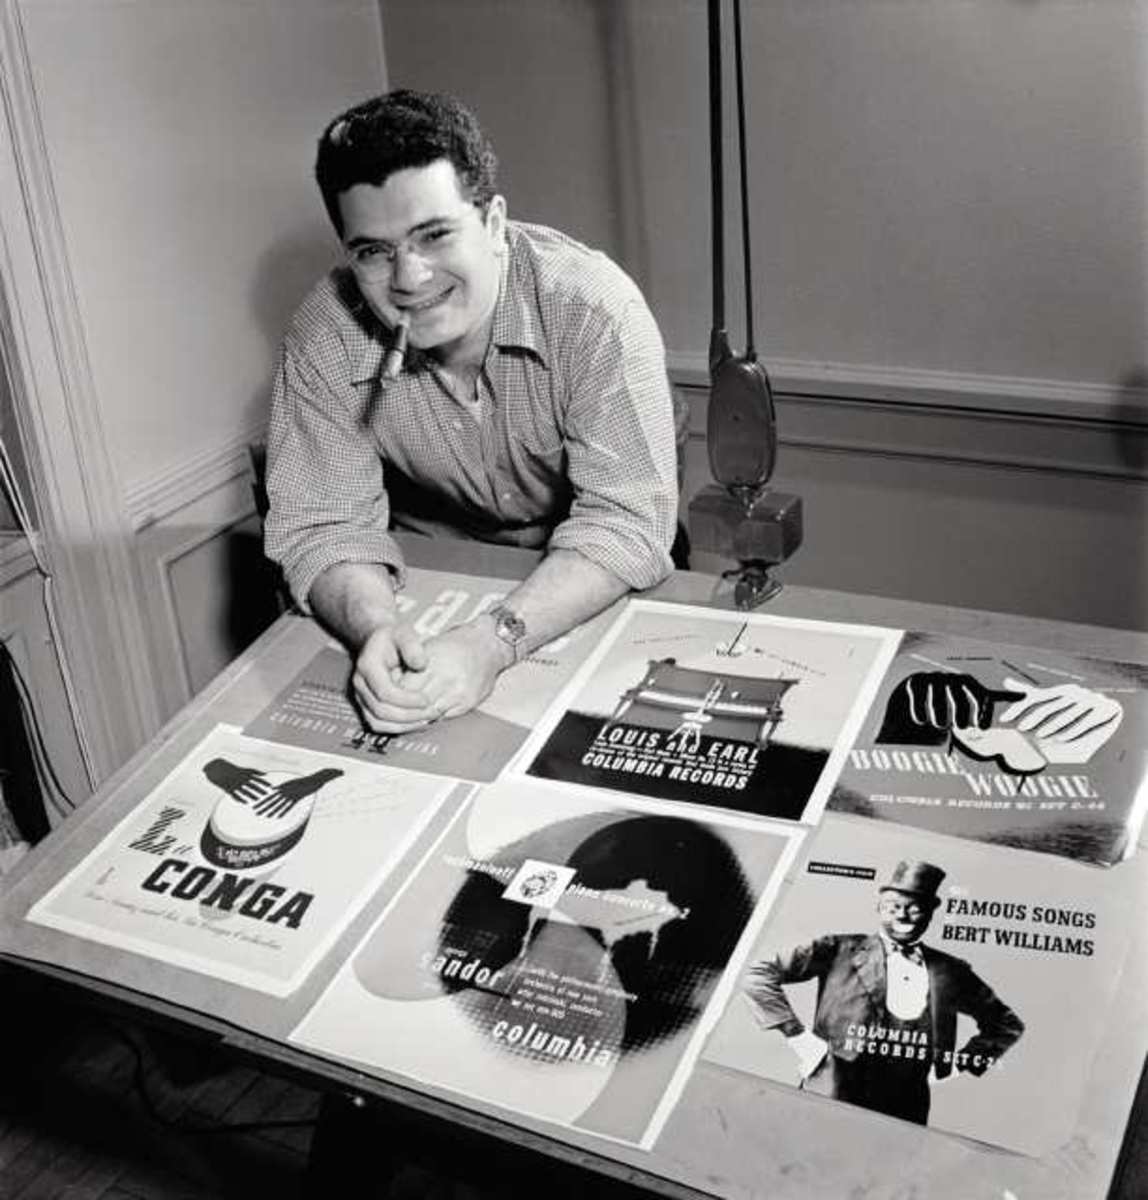 Alexander Steinweiss, the originator of the illustrated record cover